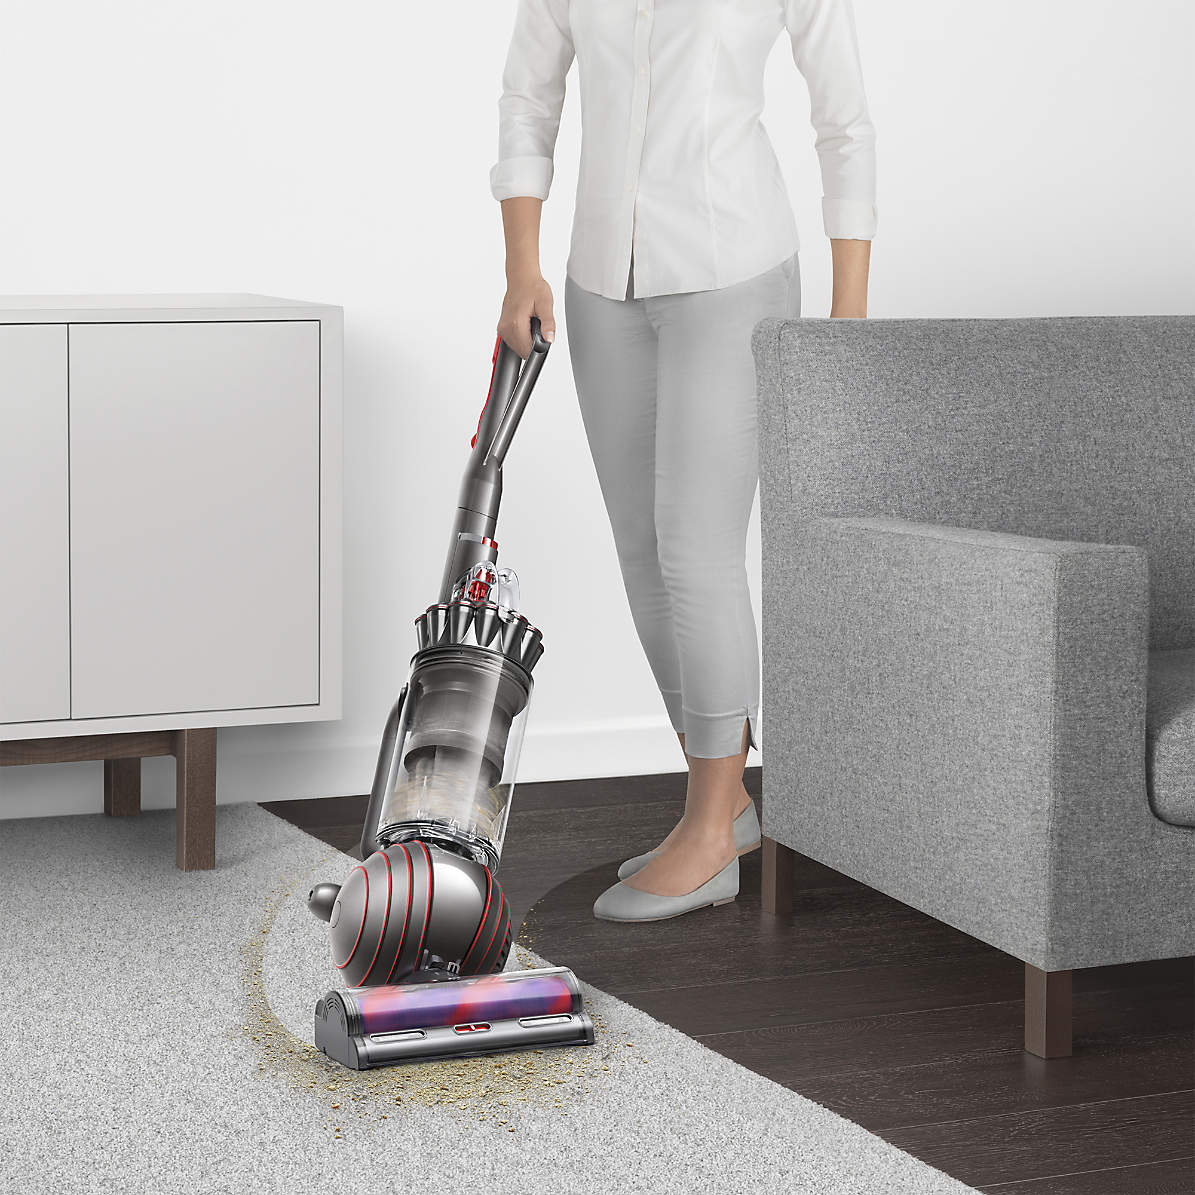 Ball Animal 3 Upright Vacuum Cleaner + Reviews | Crate & Barrel